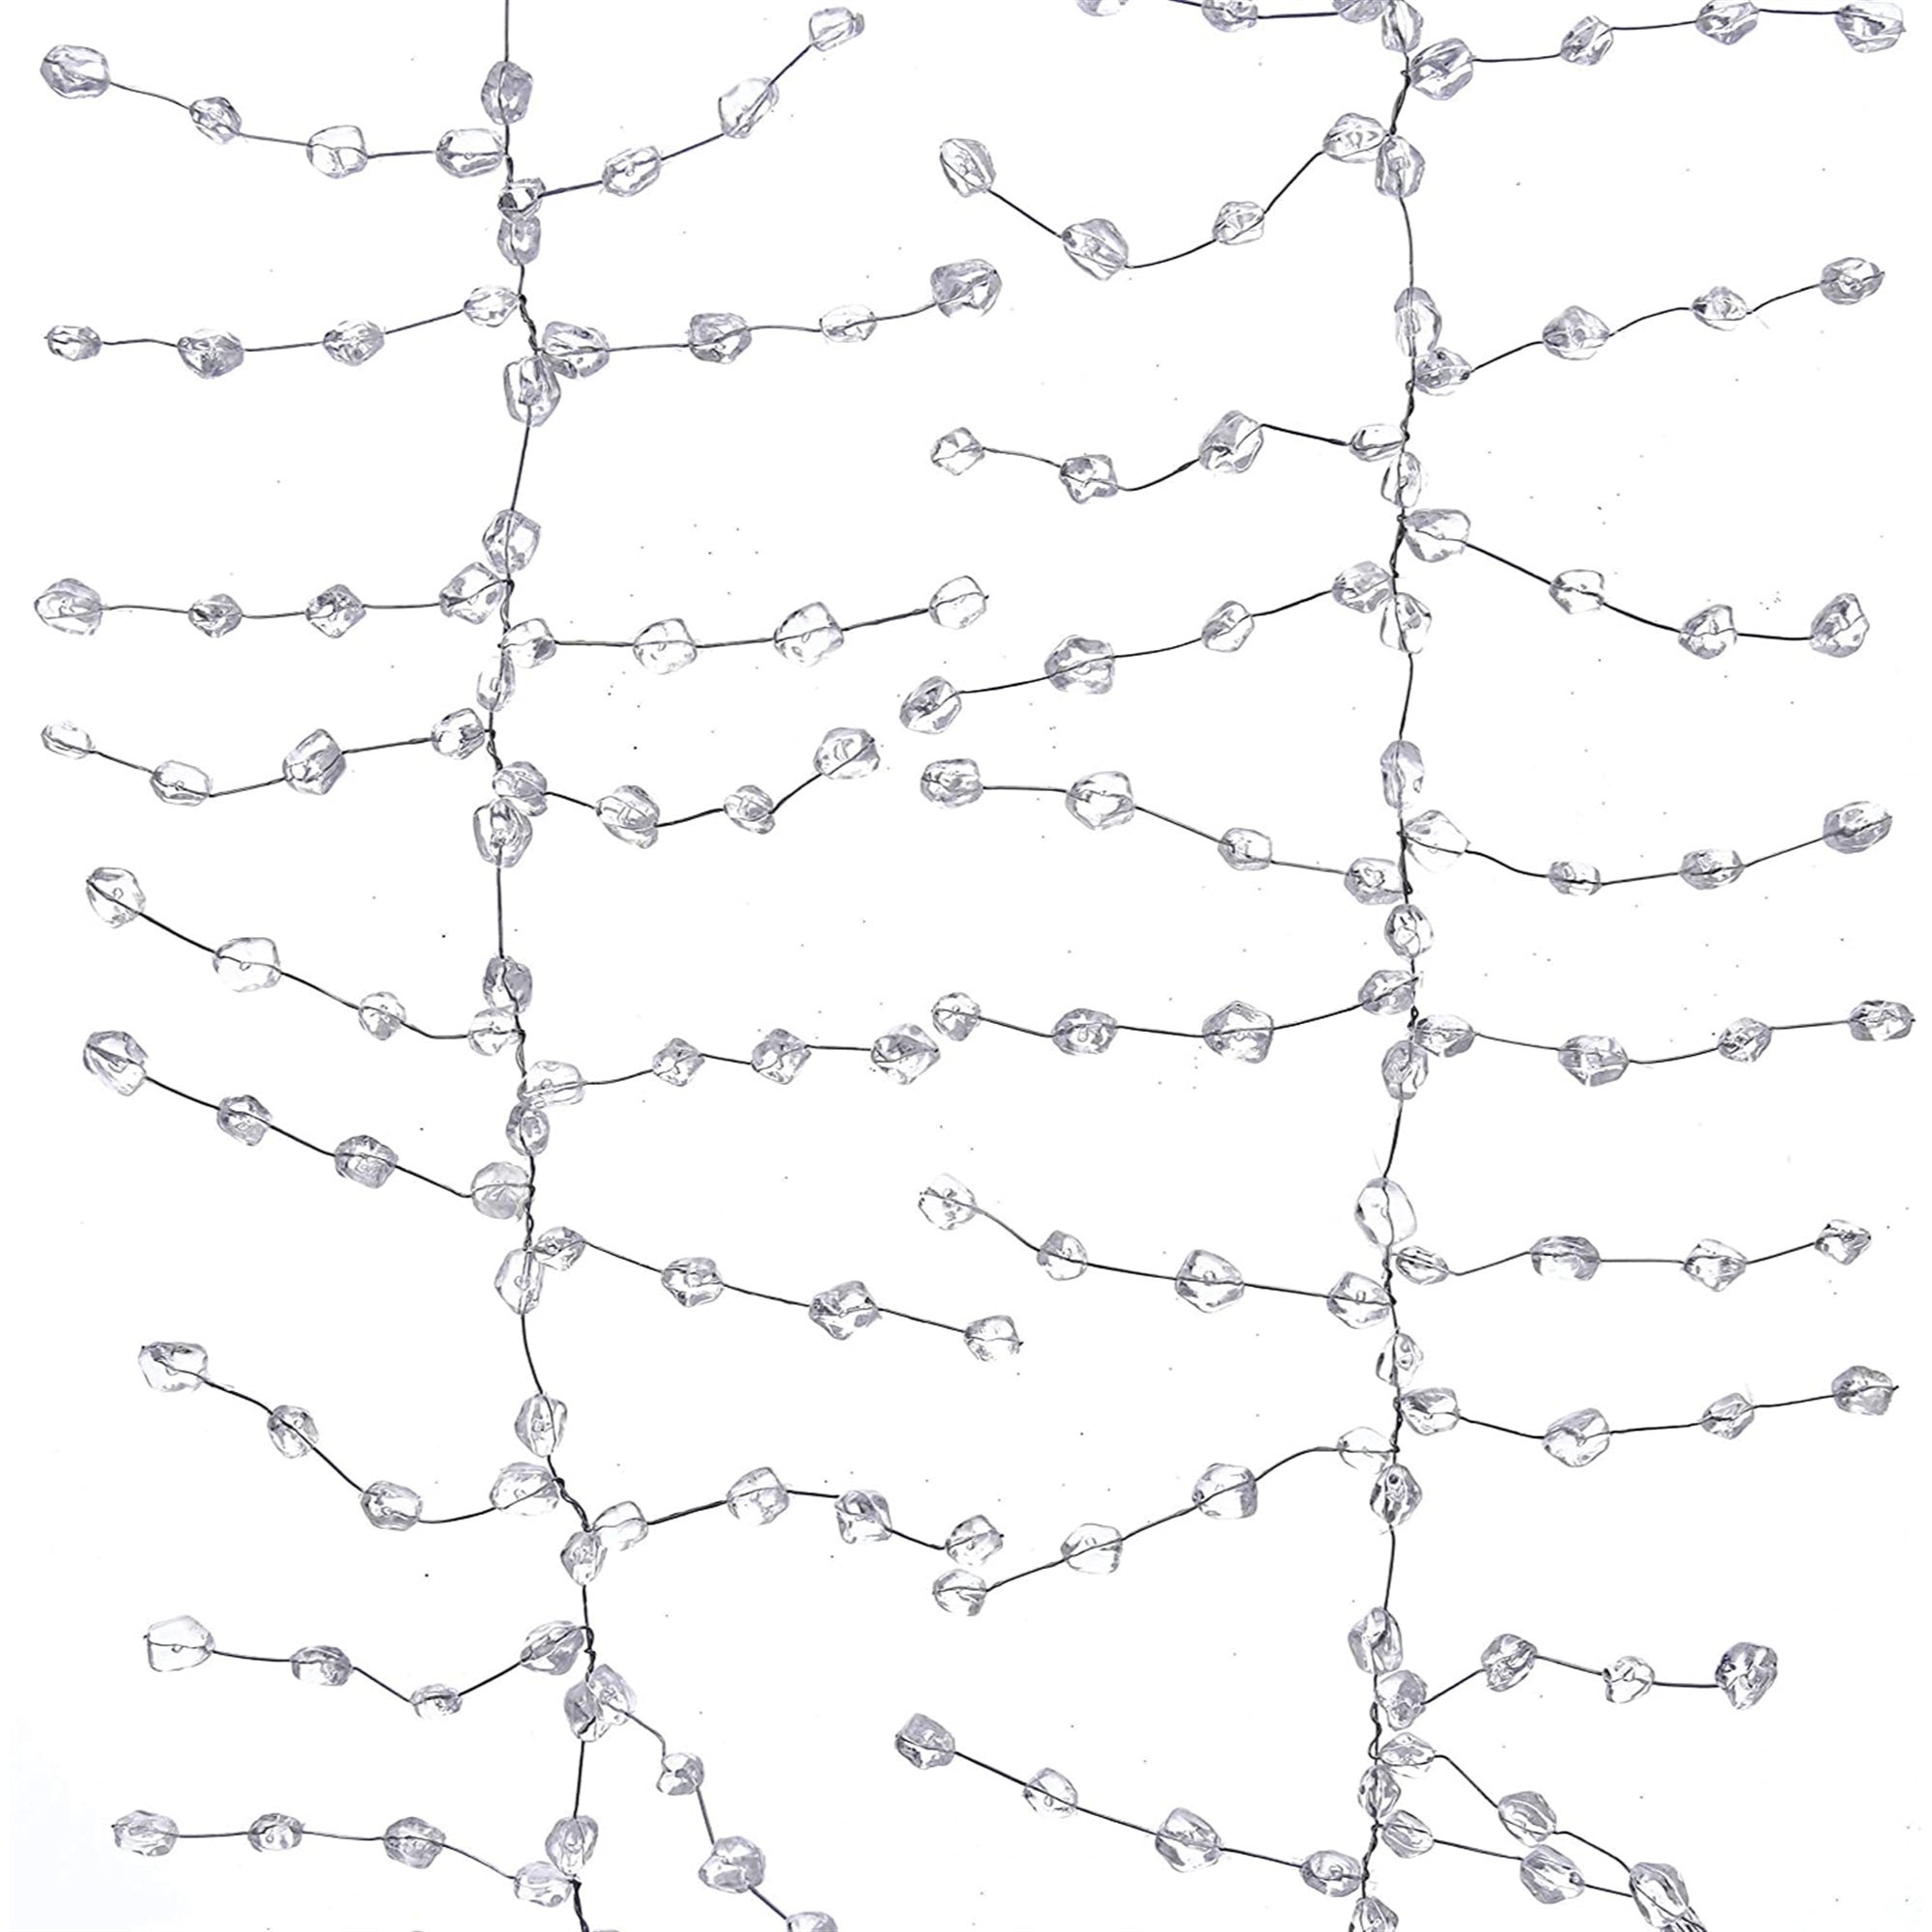 Kurt Adler Plastic Ice Wire Clear Garland For Christmas Decoration, 6 Feet Long